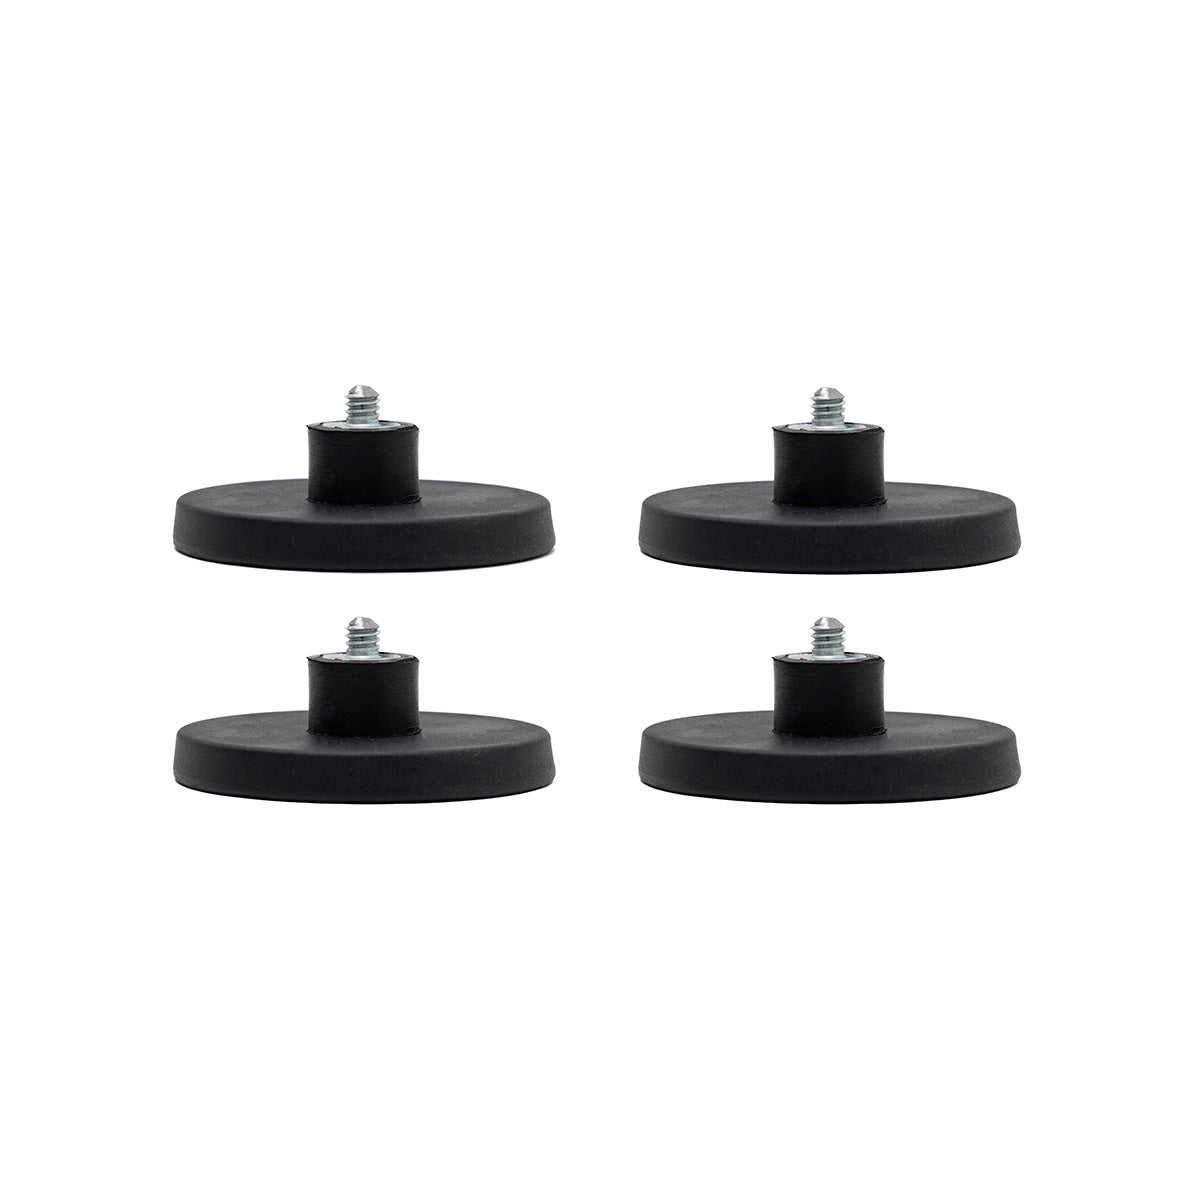 Starlink Flexible Magnetic Mounts for Antenna - Set of 4